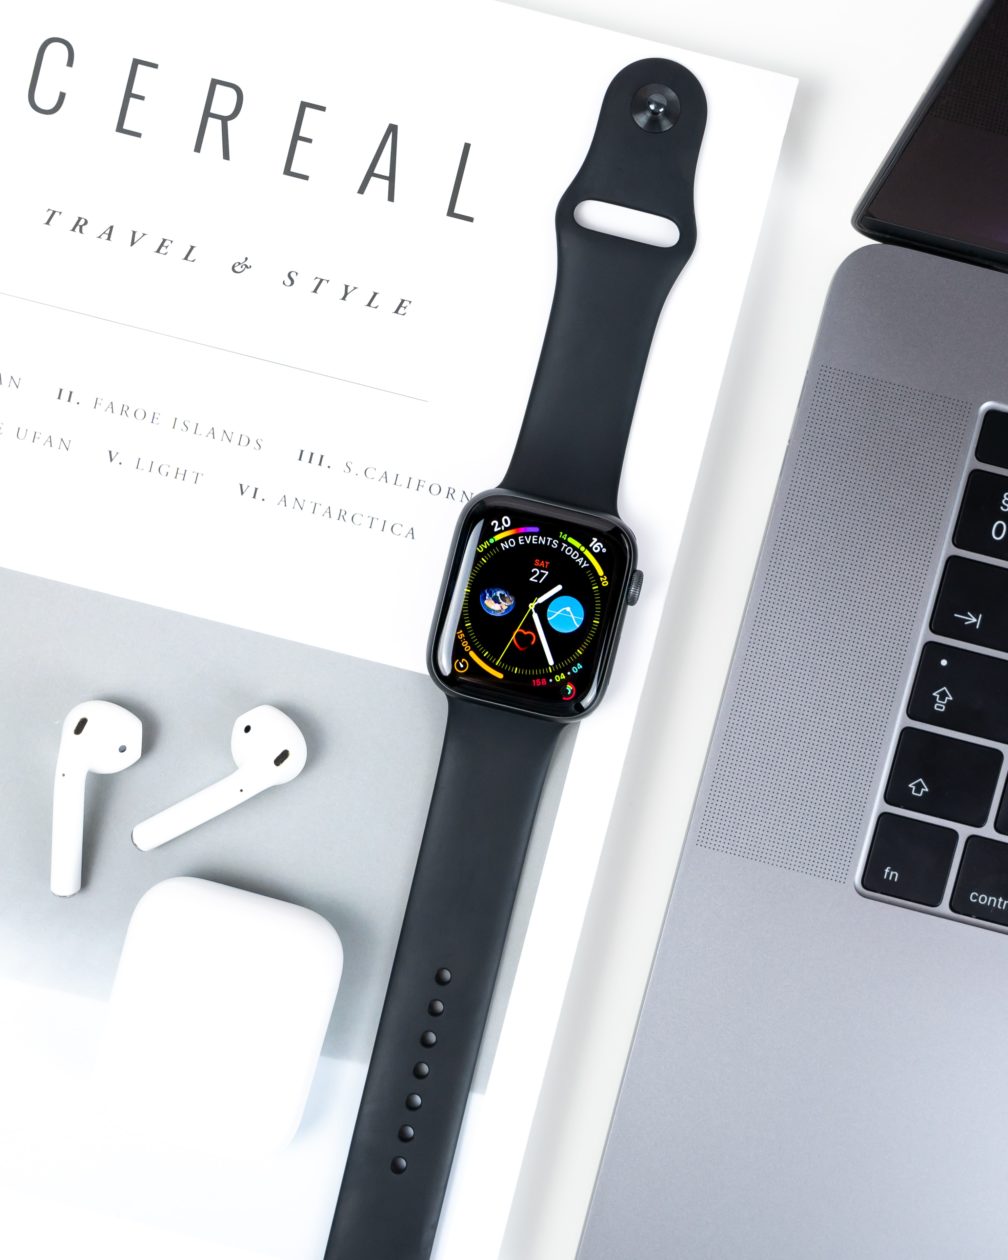 Wearables expected to pass Mac and iPad as Apple's third largest segment by 2020